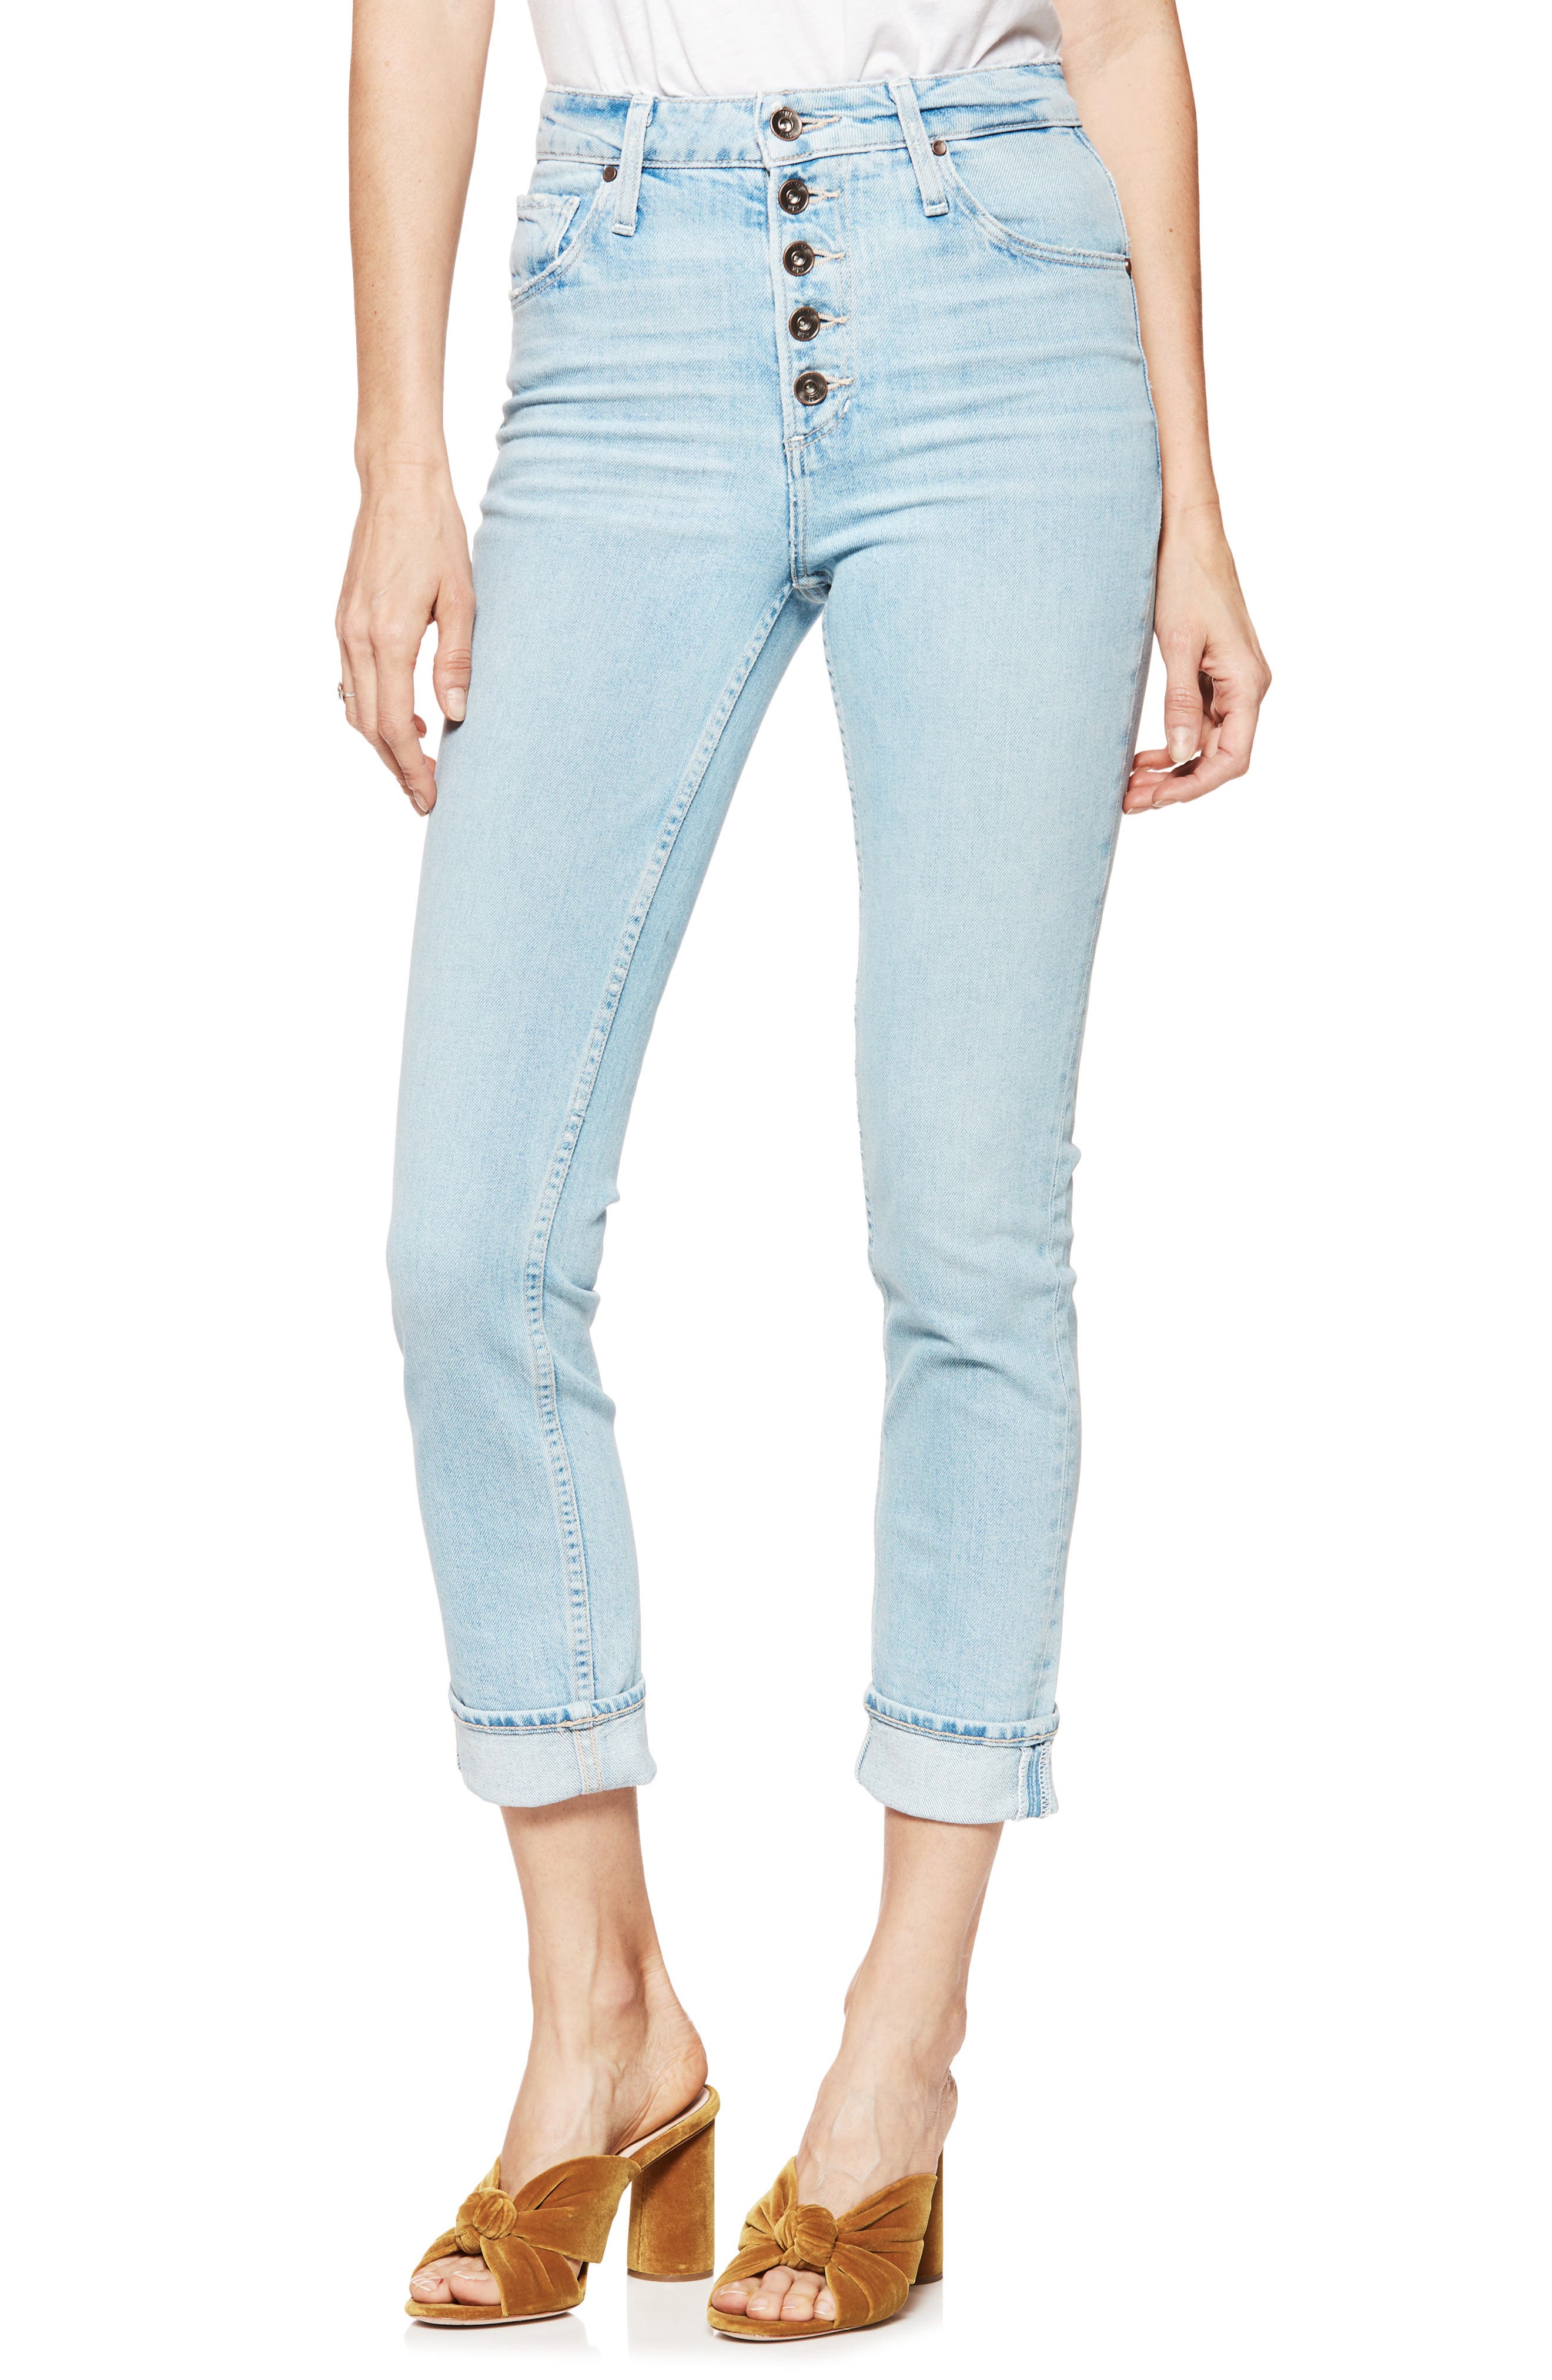 paige button fly jeans